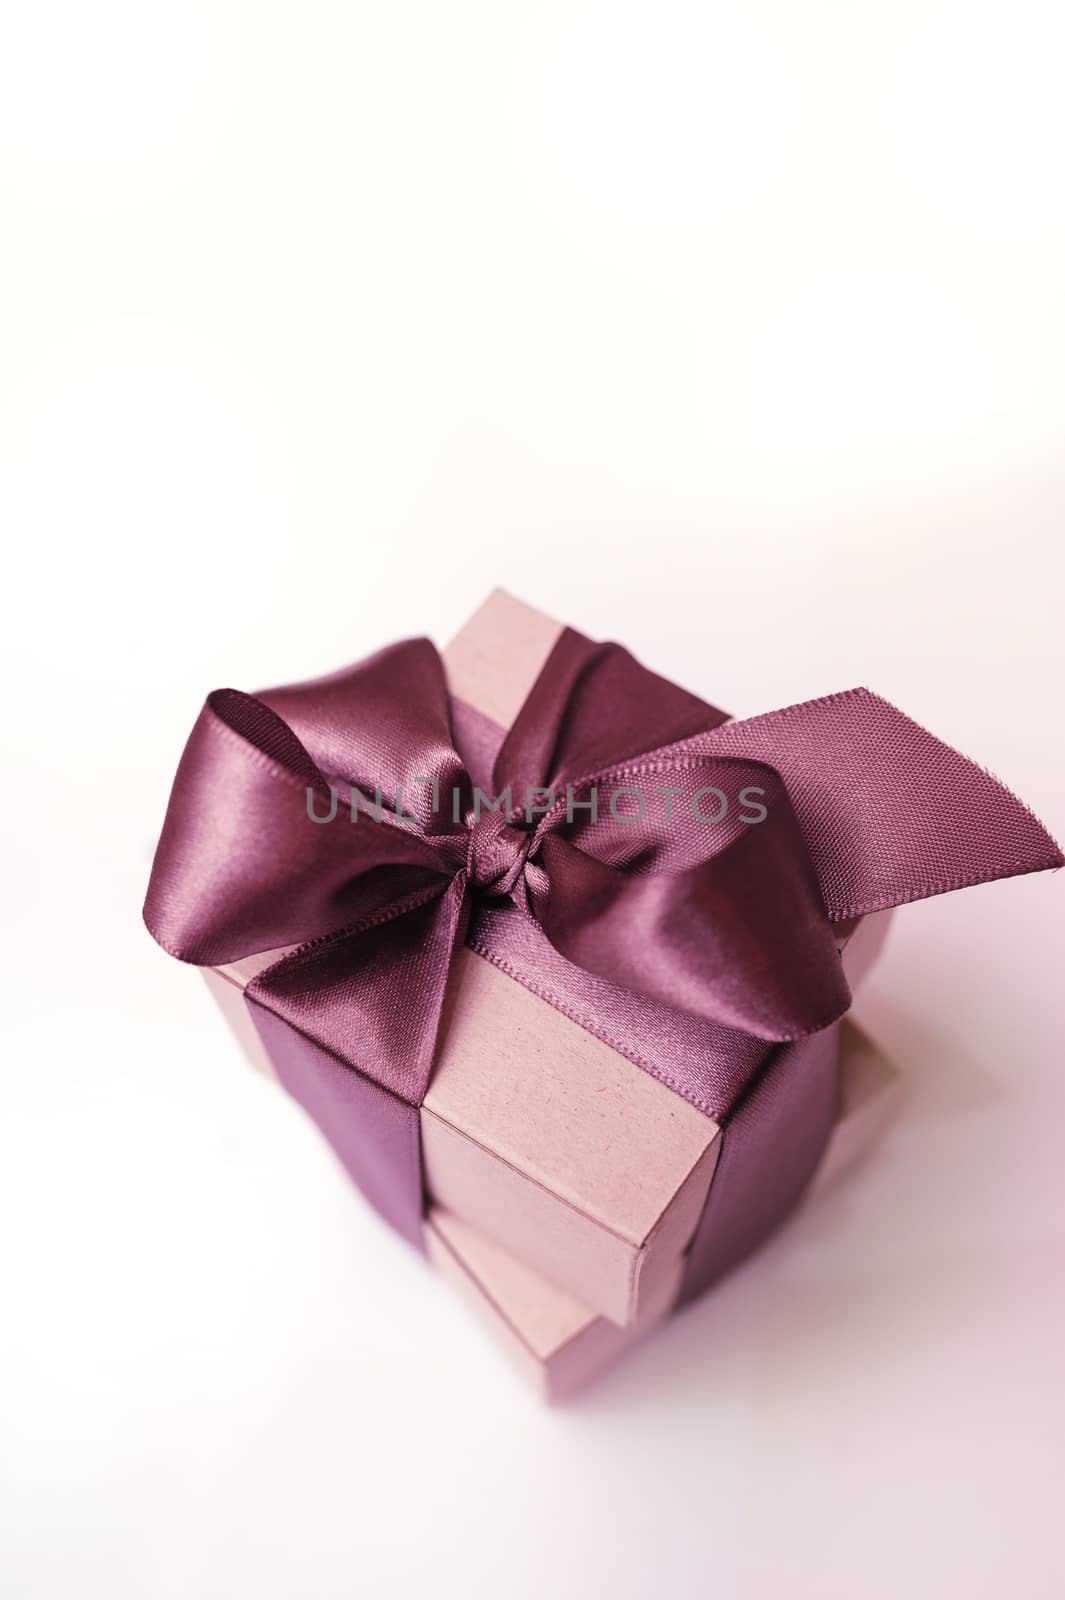 gift box of kraft paper with brown ribbon by timonko